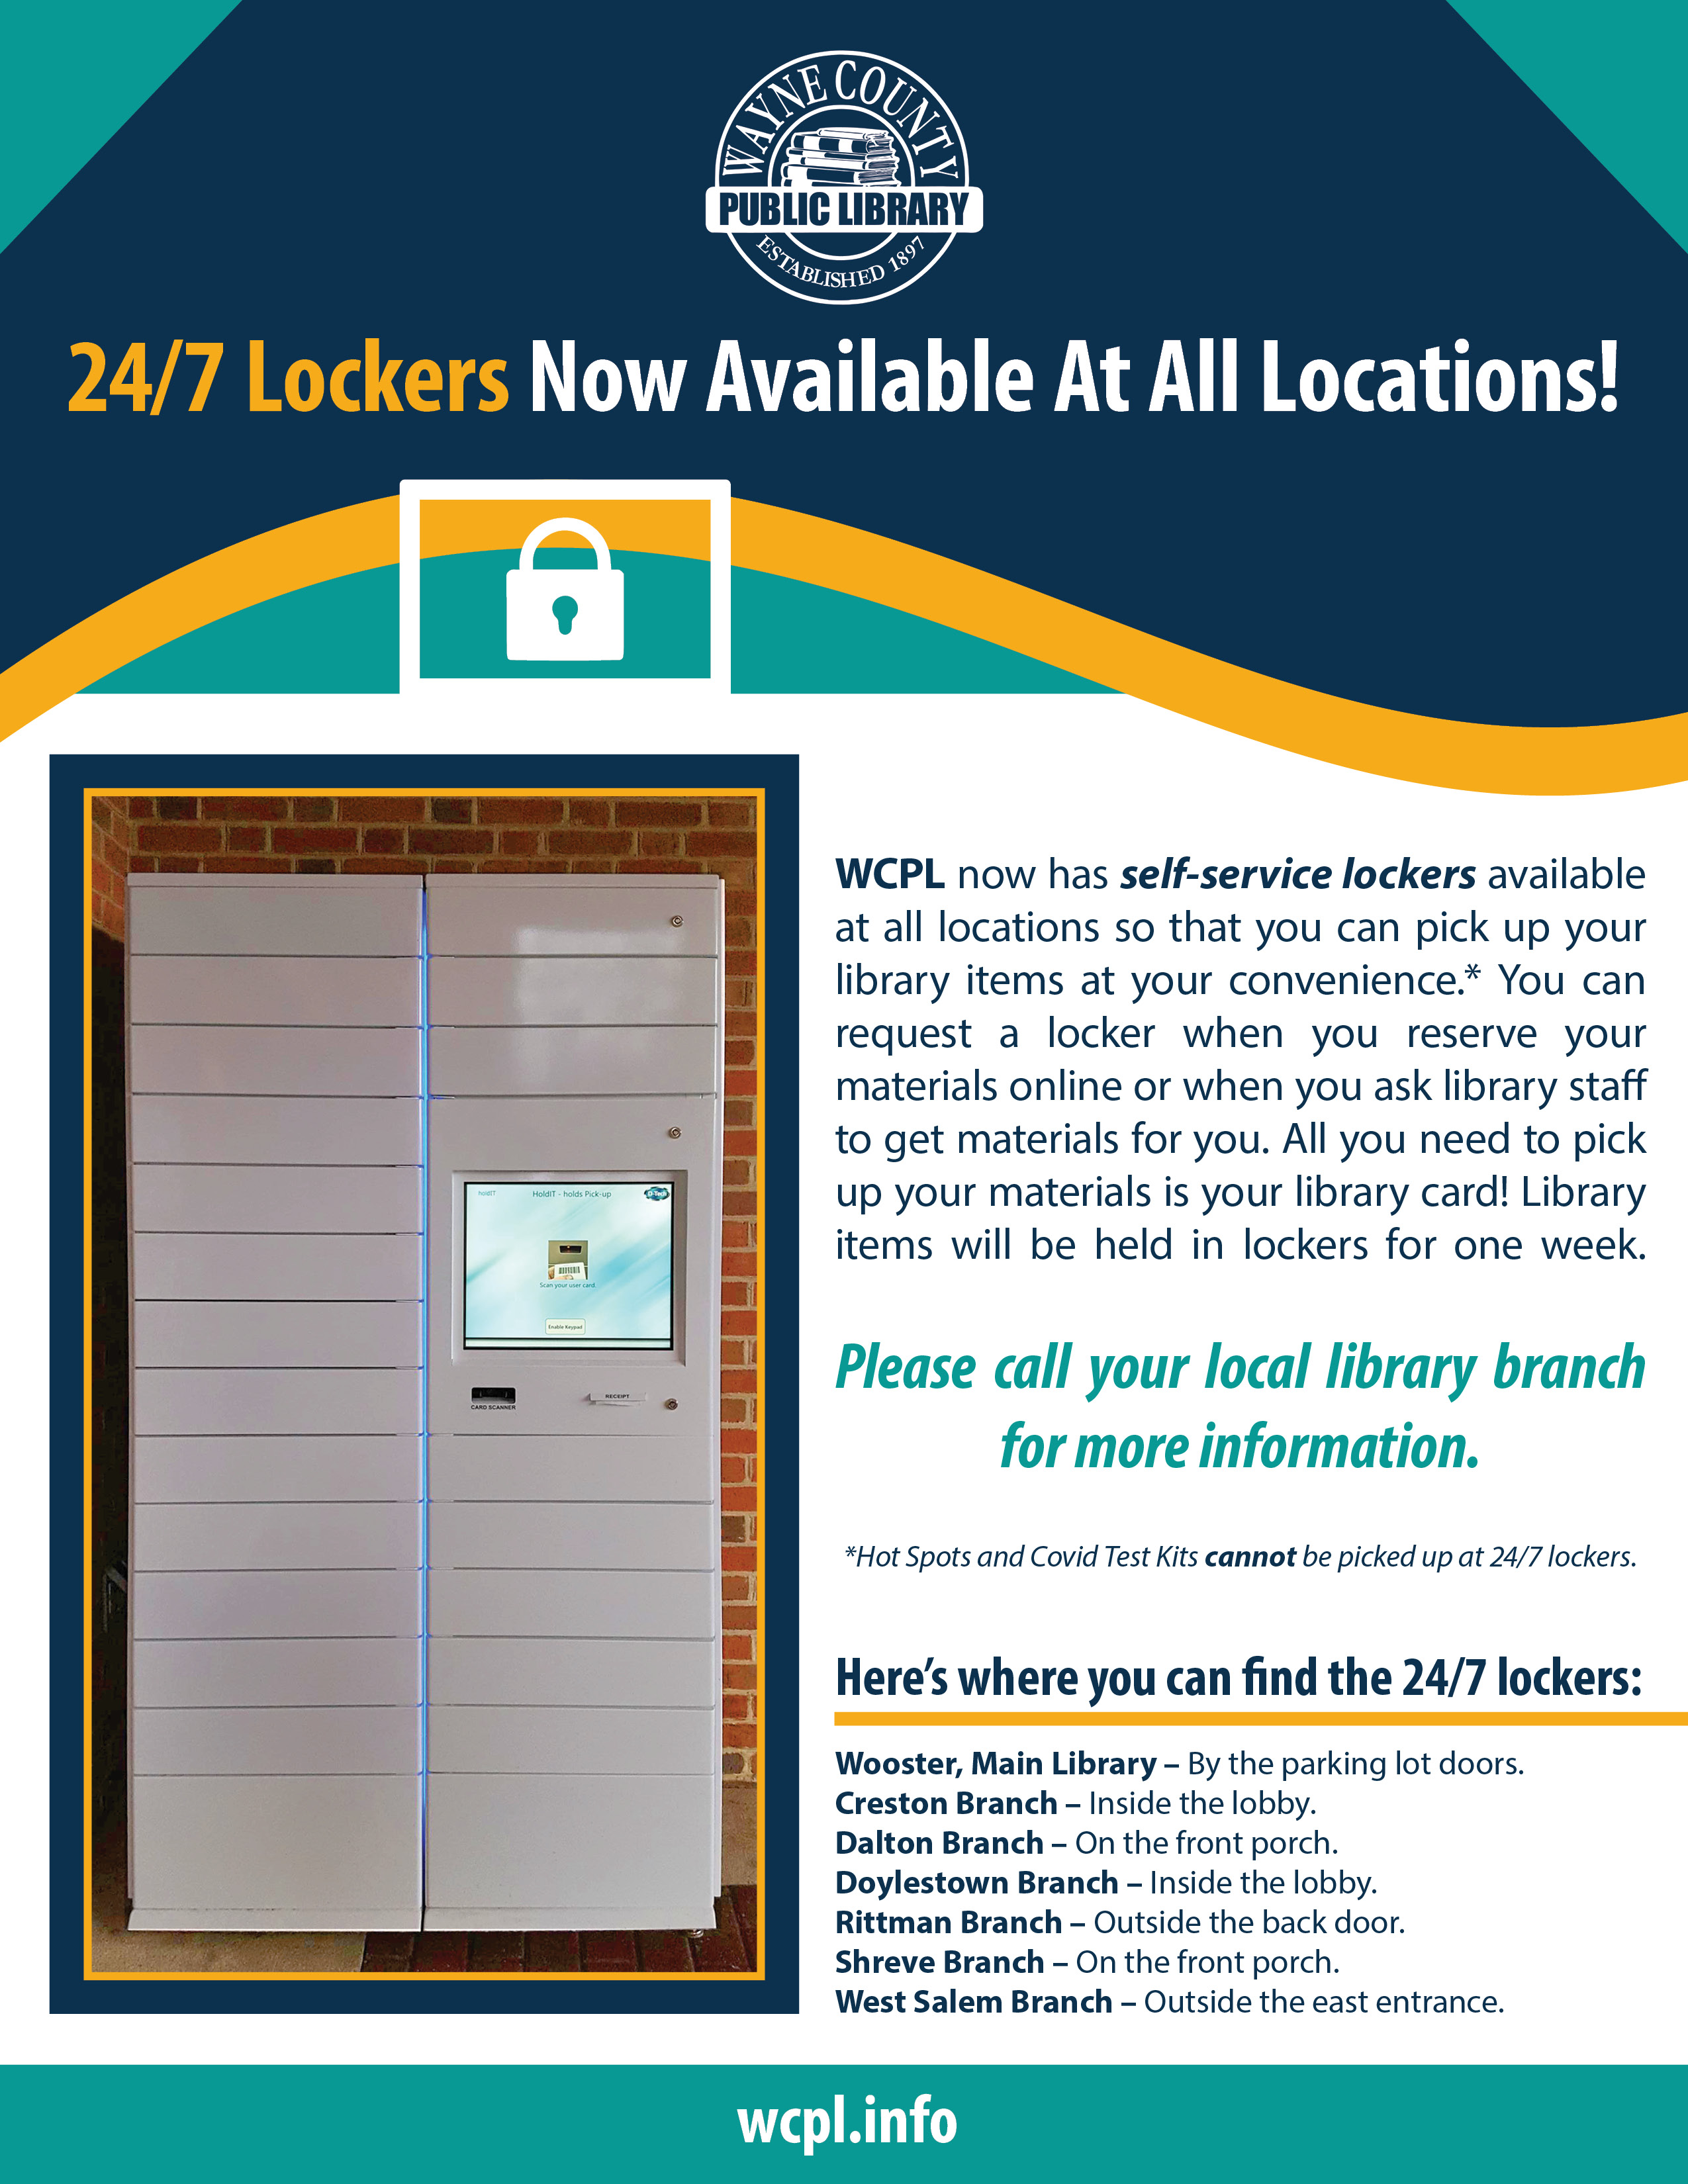 24/7 Lockers Now Available!